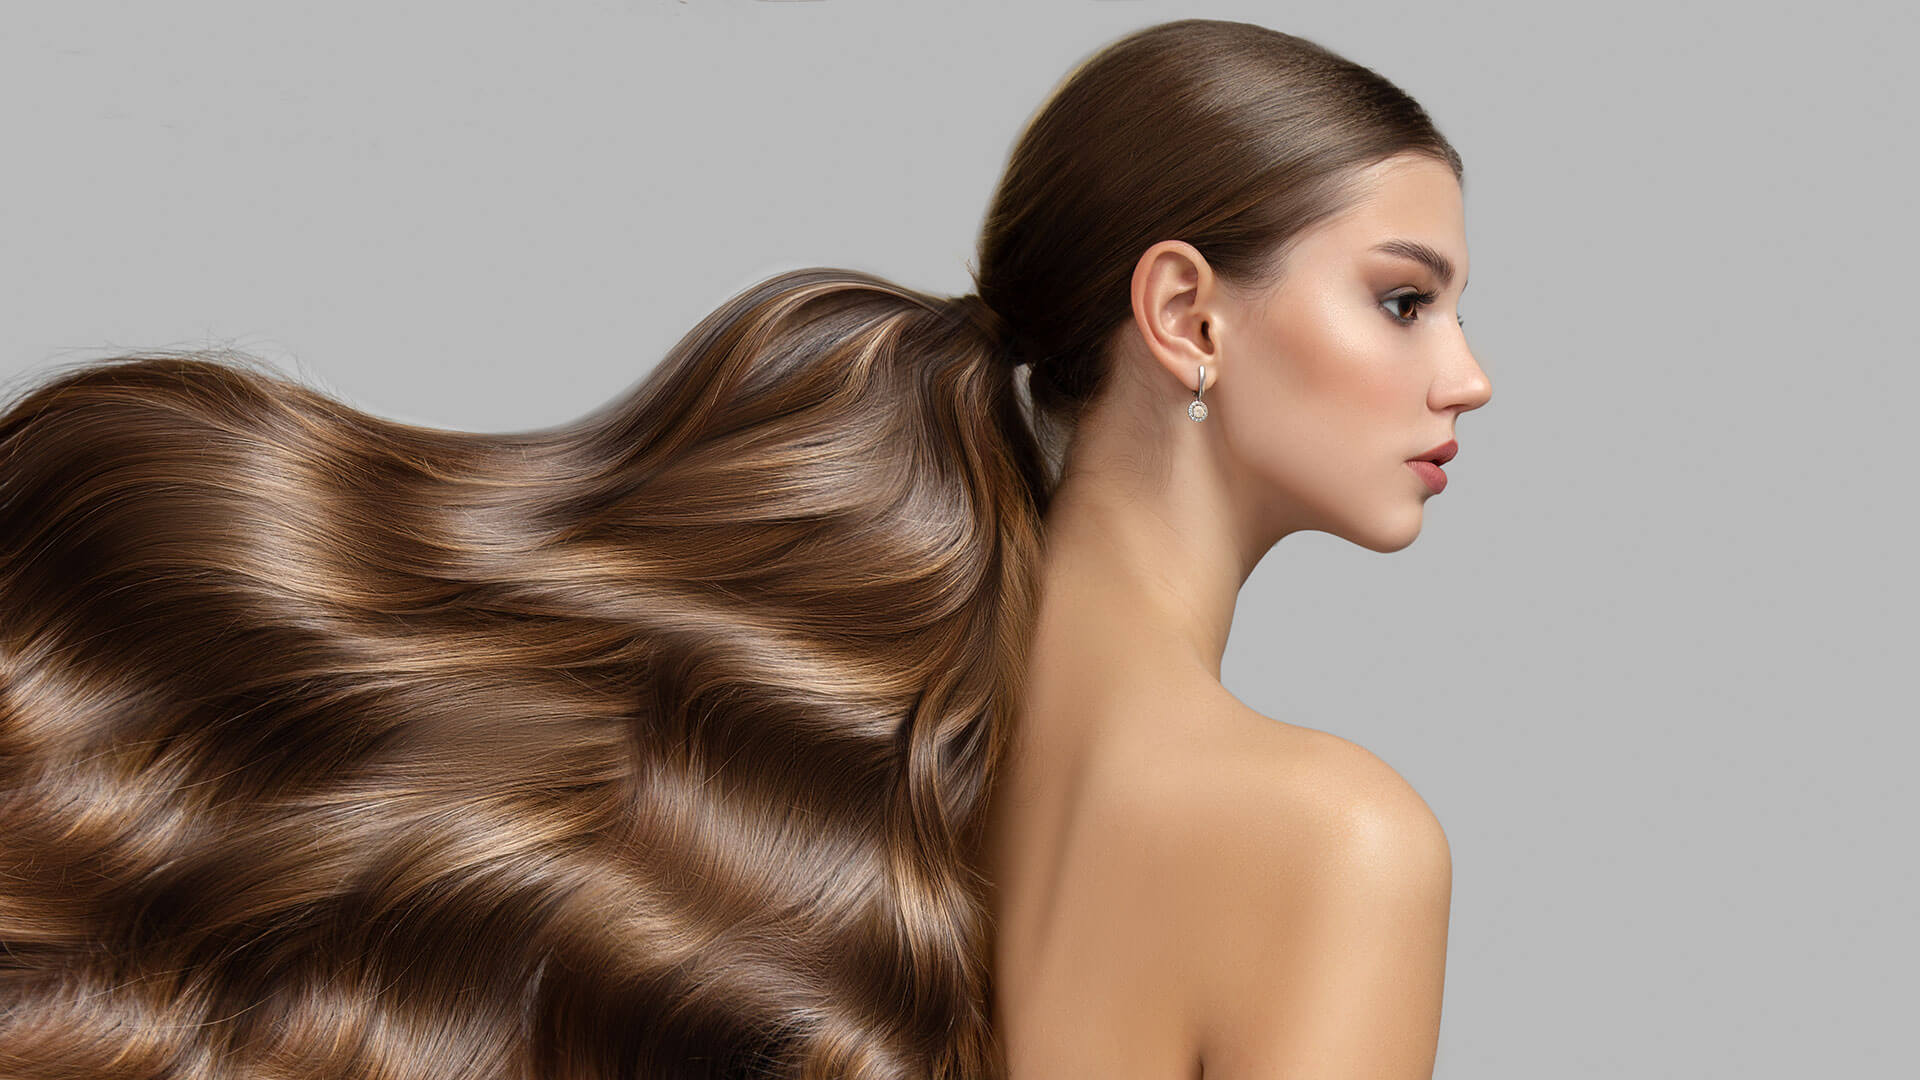 Hair Extensions Pros and Cons: Are Hair Extensions Worth It?